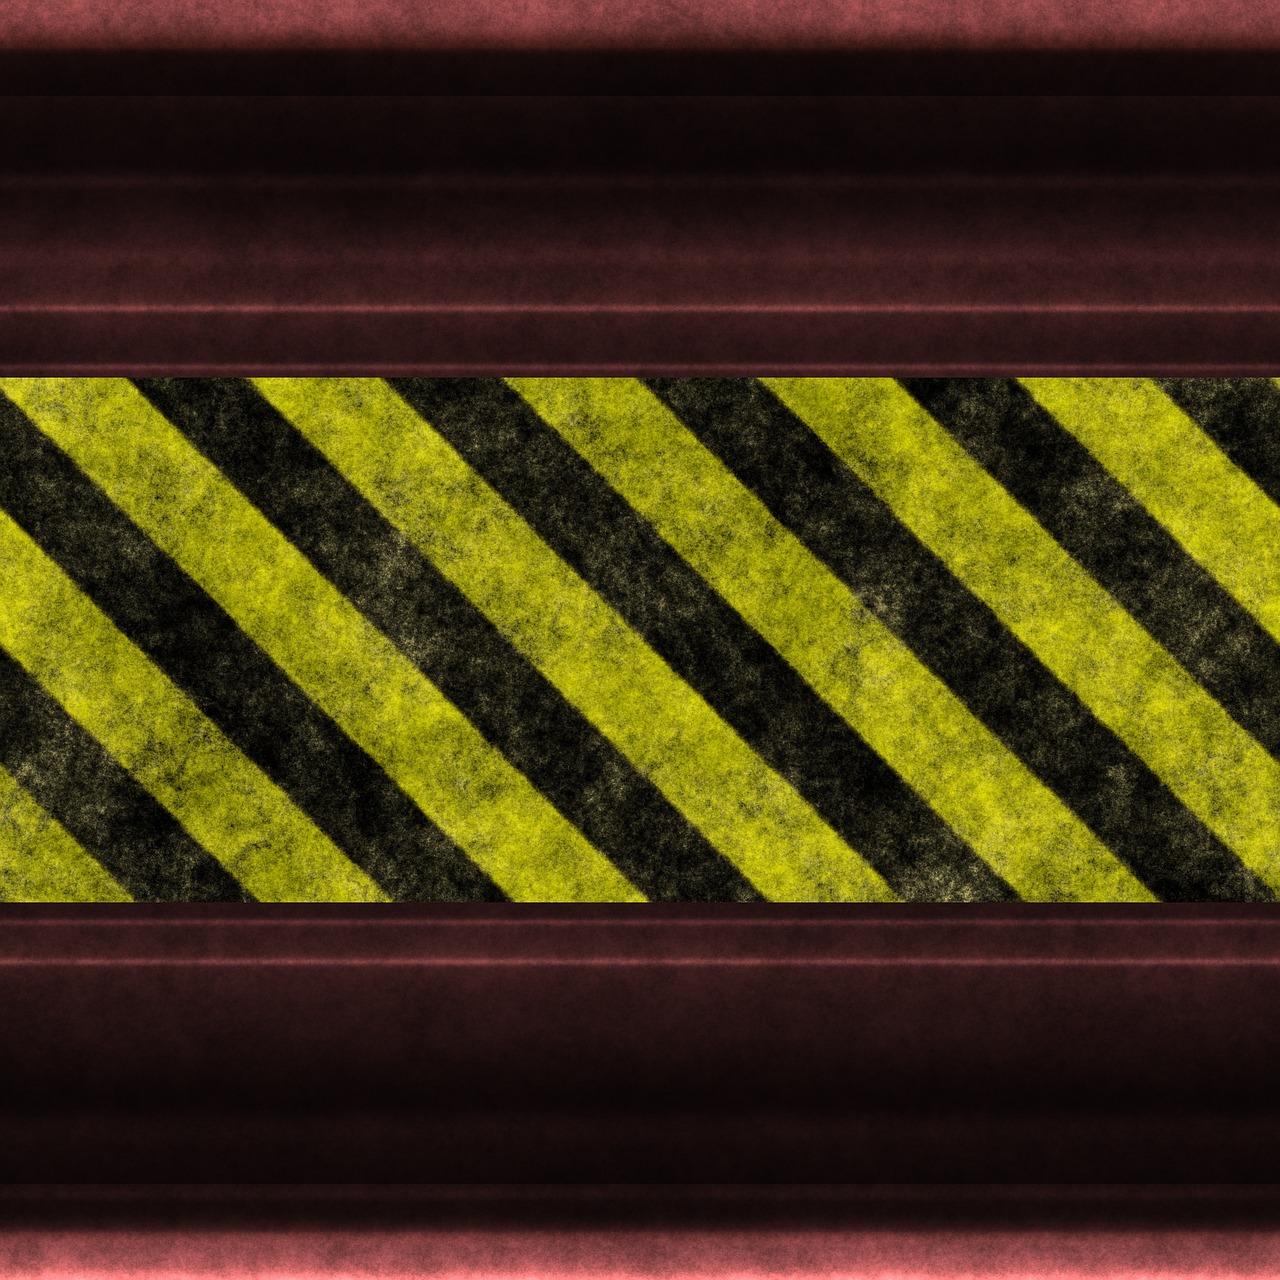 no entry background texture free photo